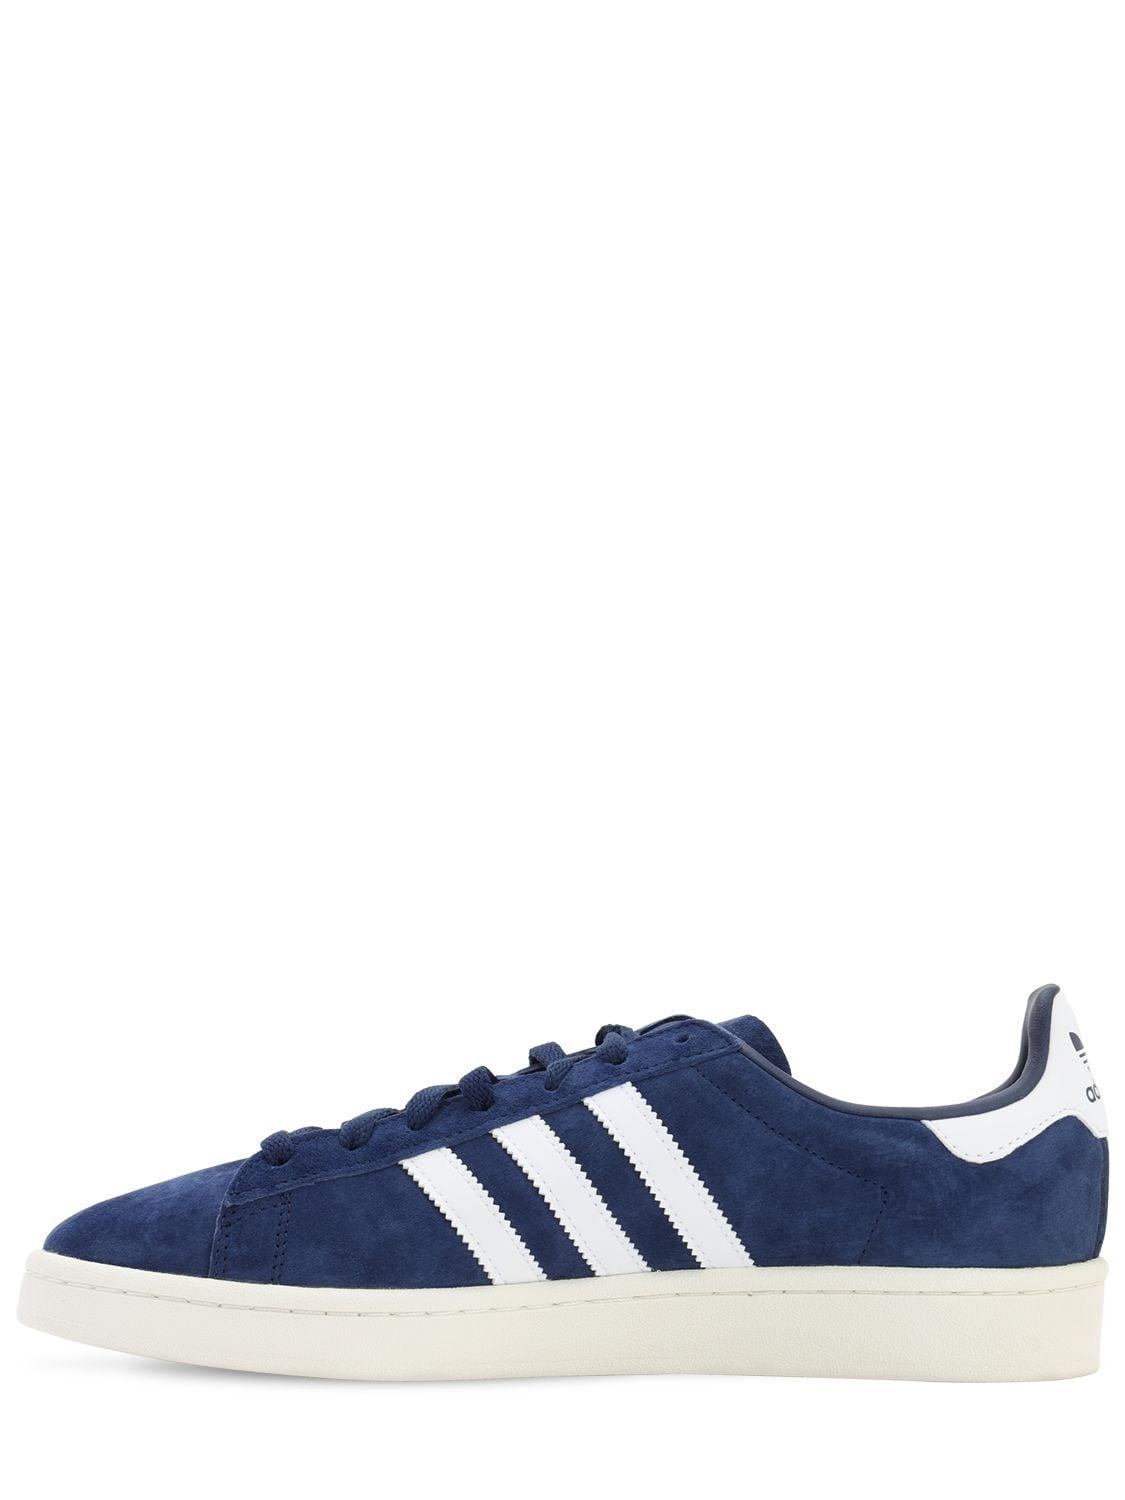 adidas Campus Sneakers in Navy (Blue) for Men - Lyst